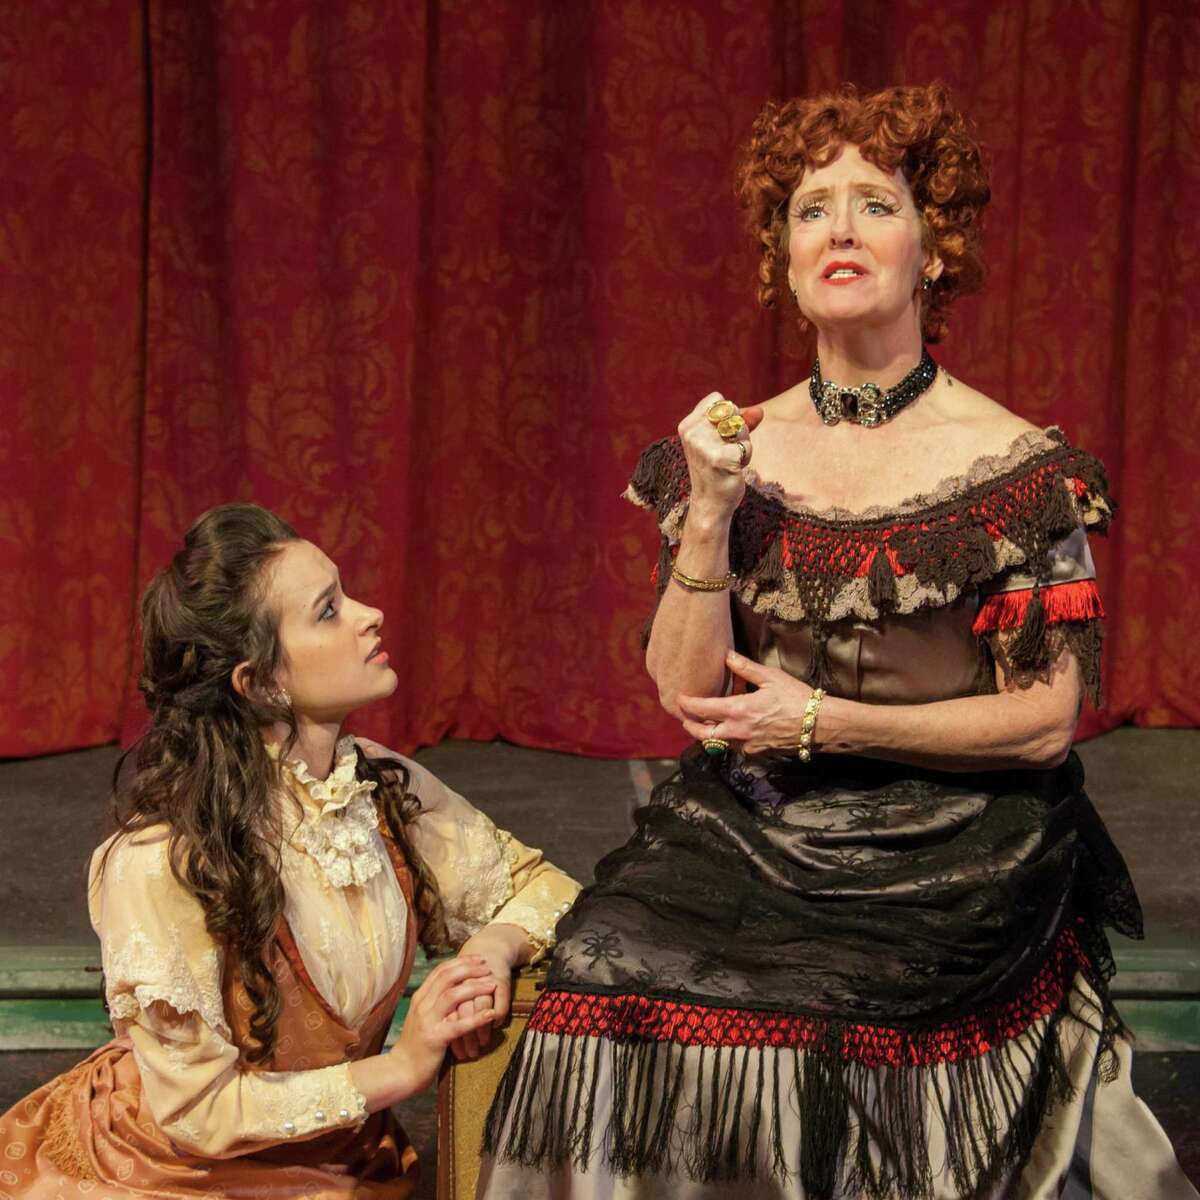 Sara Curtis and Leigh Strimbeck in Theatre Institute at Sage's production of "The Mystery of Edwin Drood," onstage from April 12-21, 2013. (Courtesy Theatre Institute at Sage)